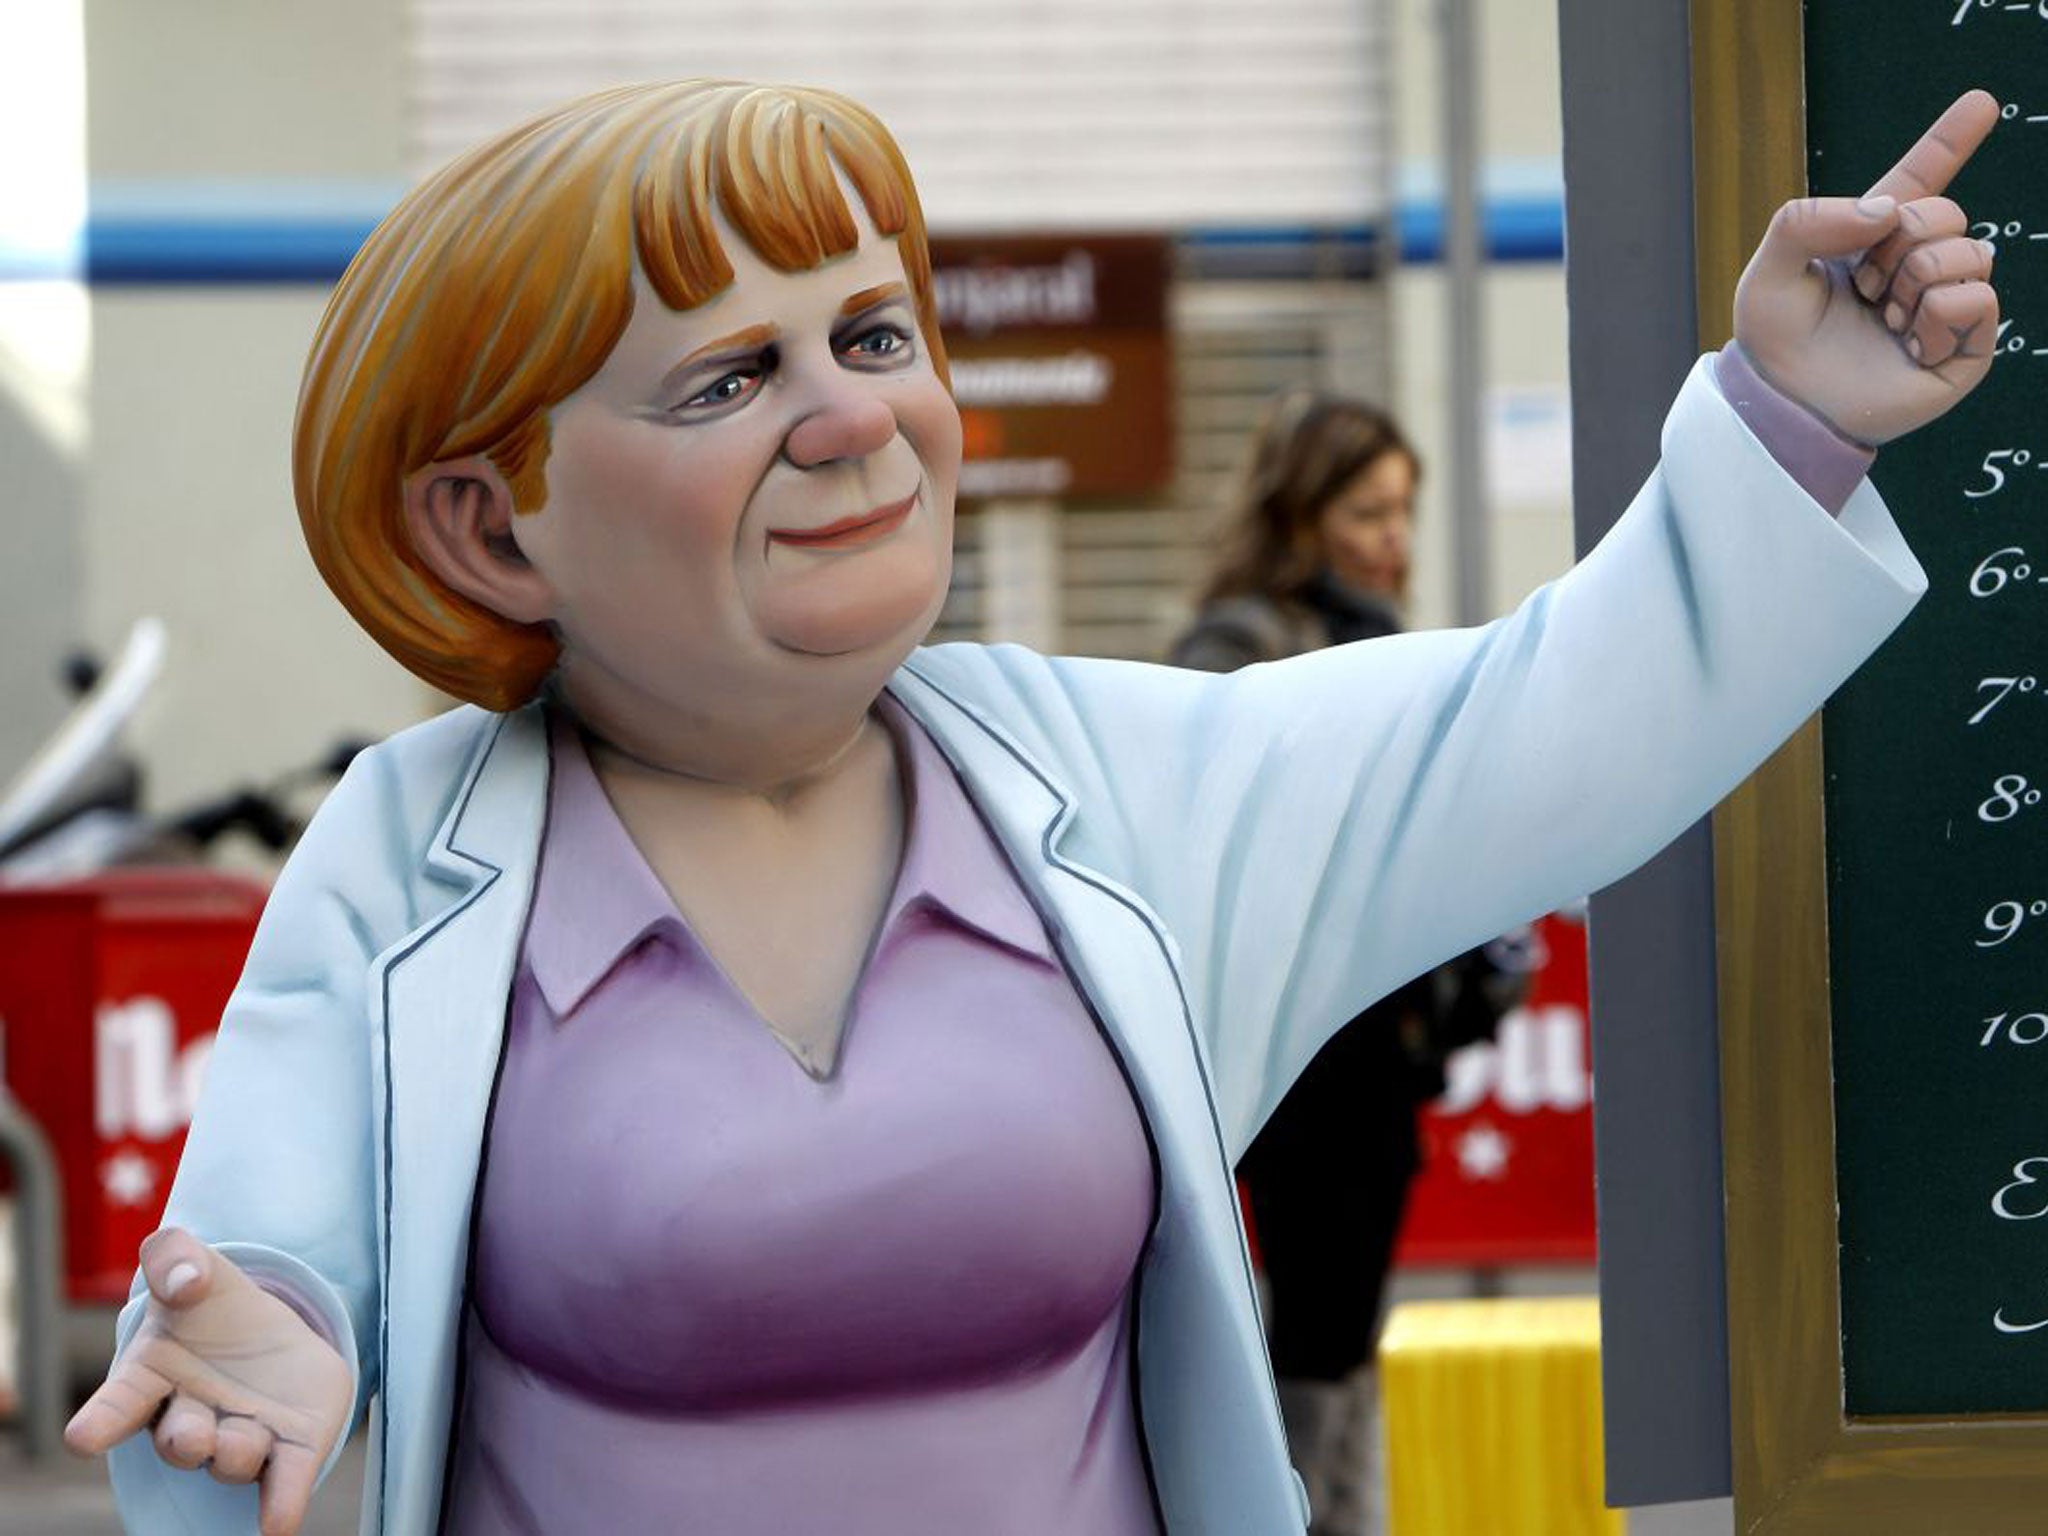 A falla – a satirical structure – caricaturing Angela Merkel was displayed in Spain